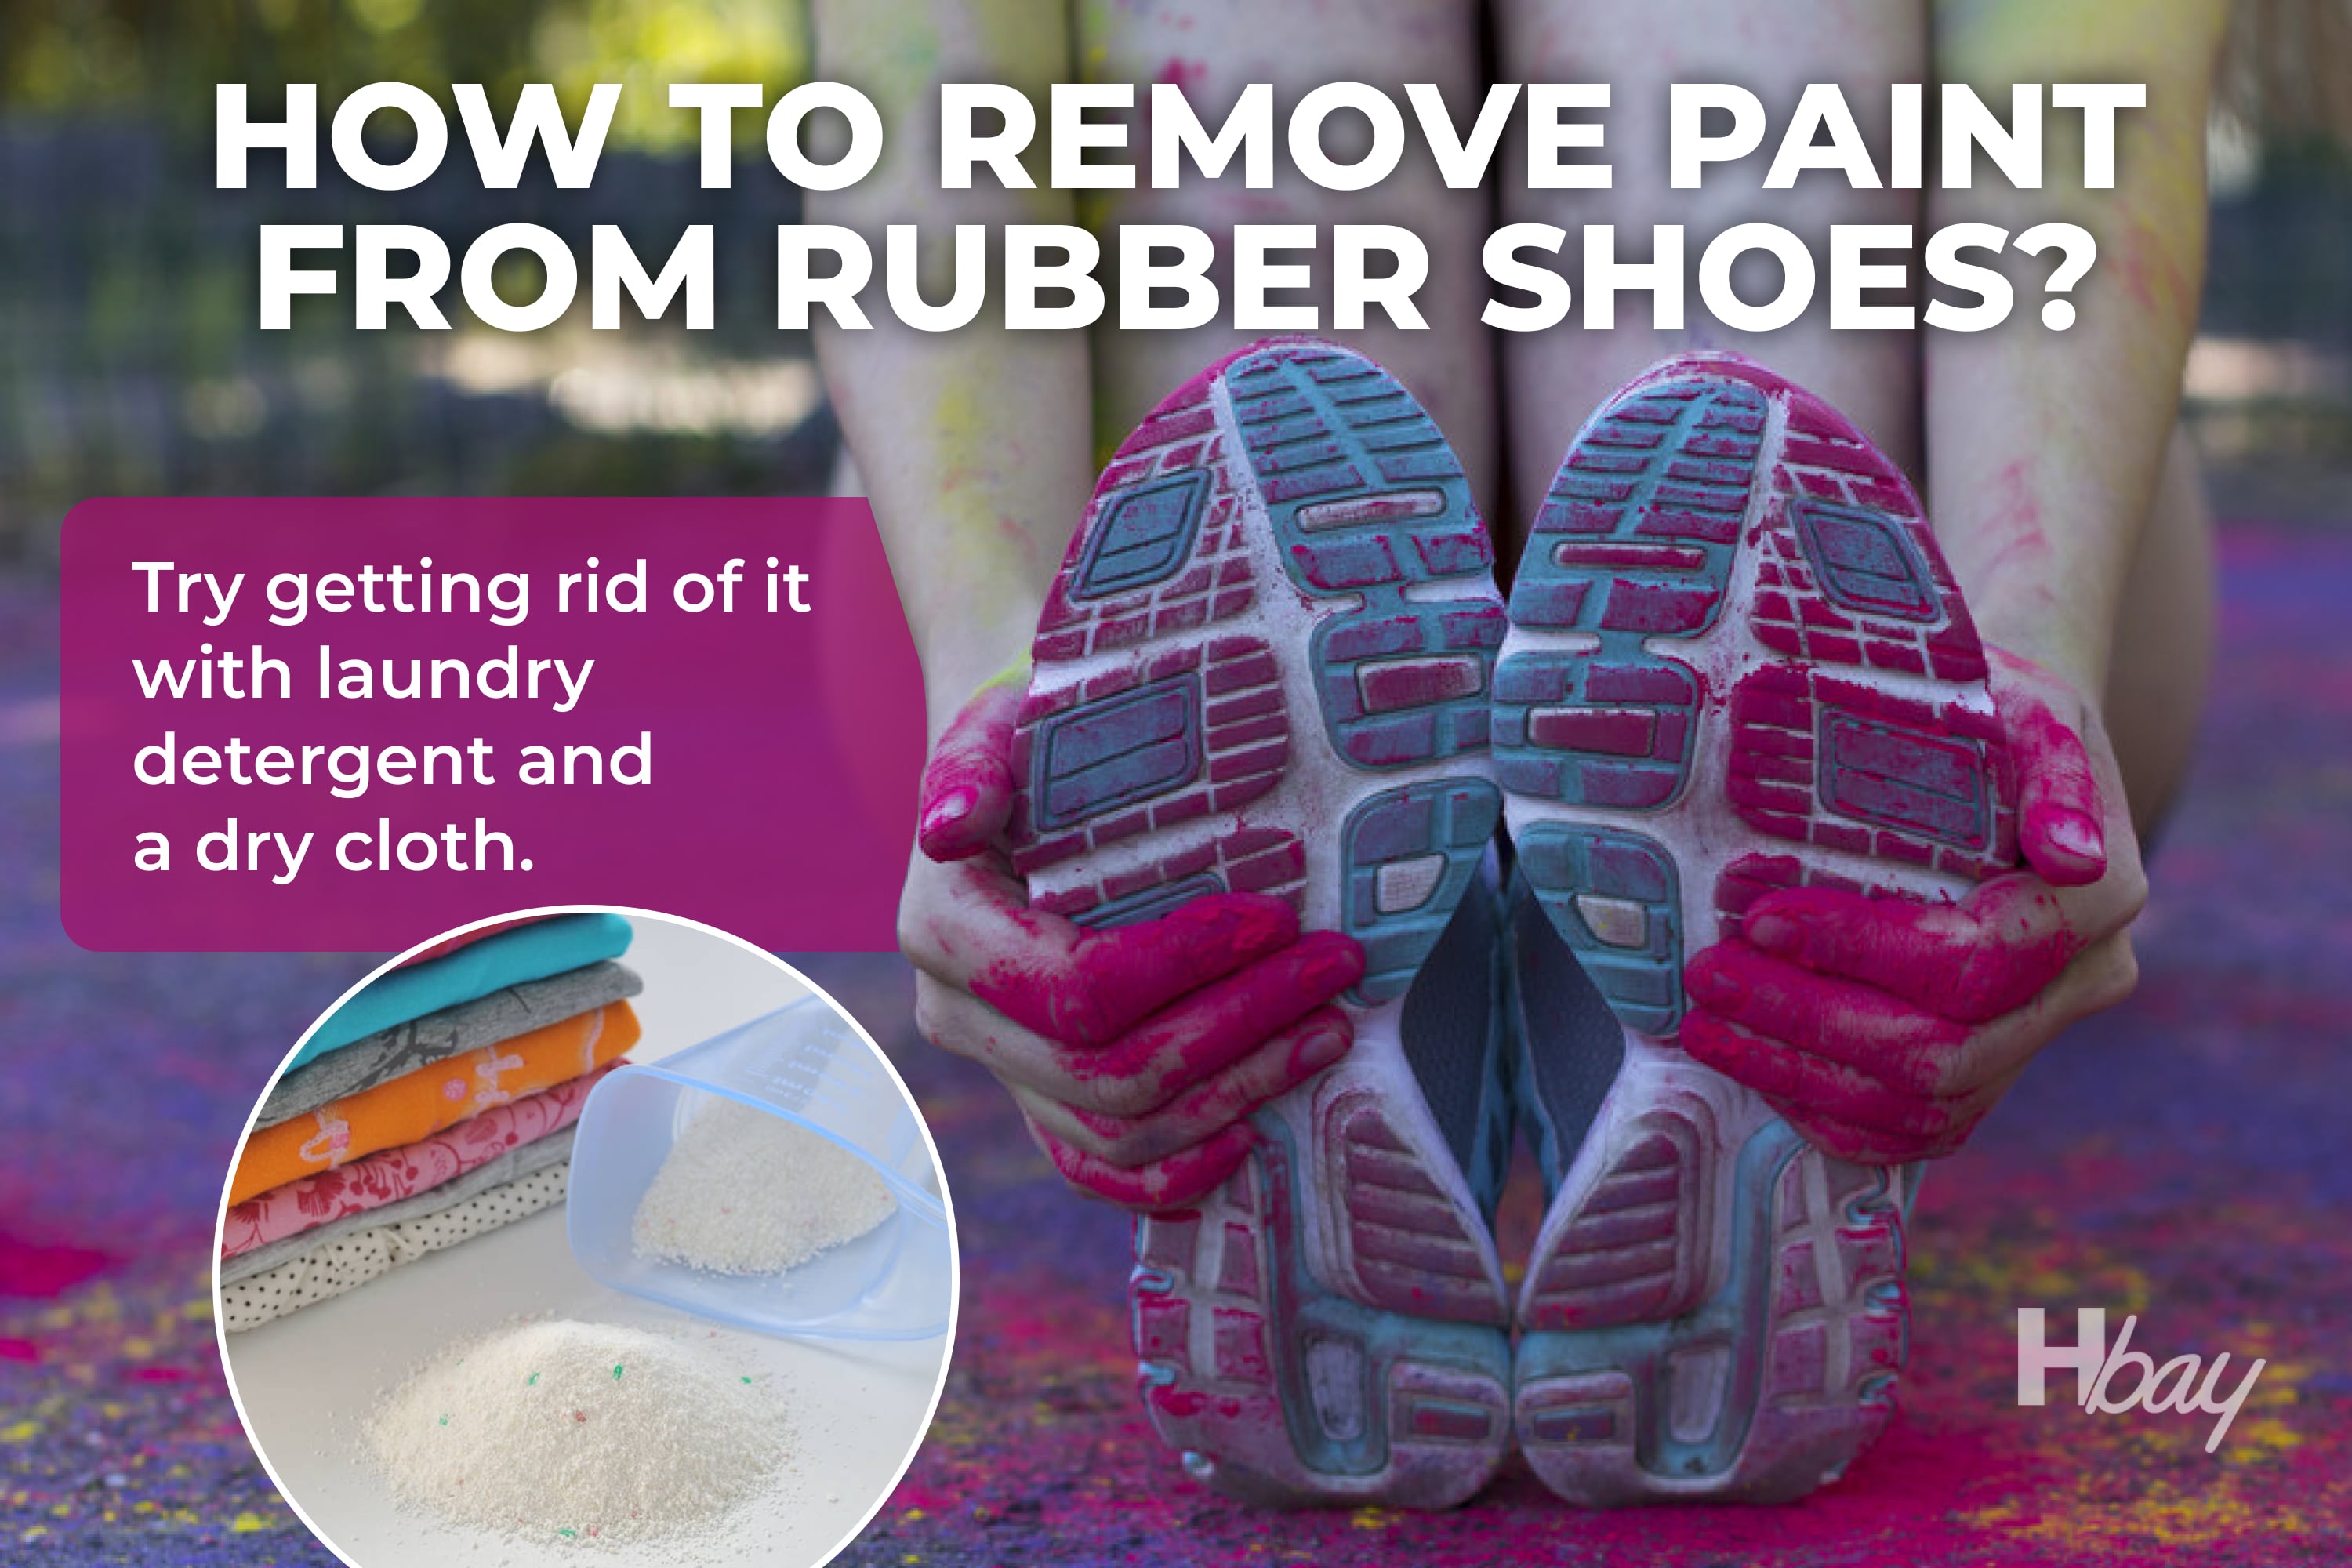 How to remove paint from rubber shoes